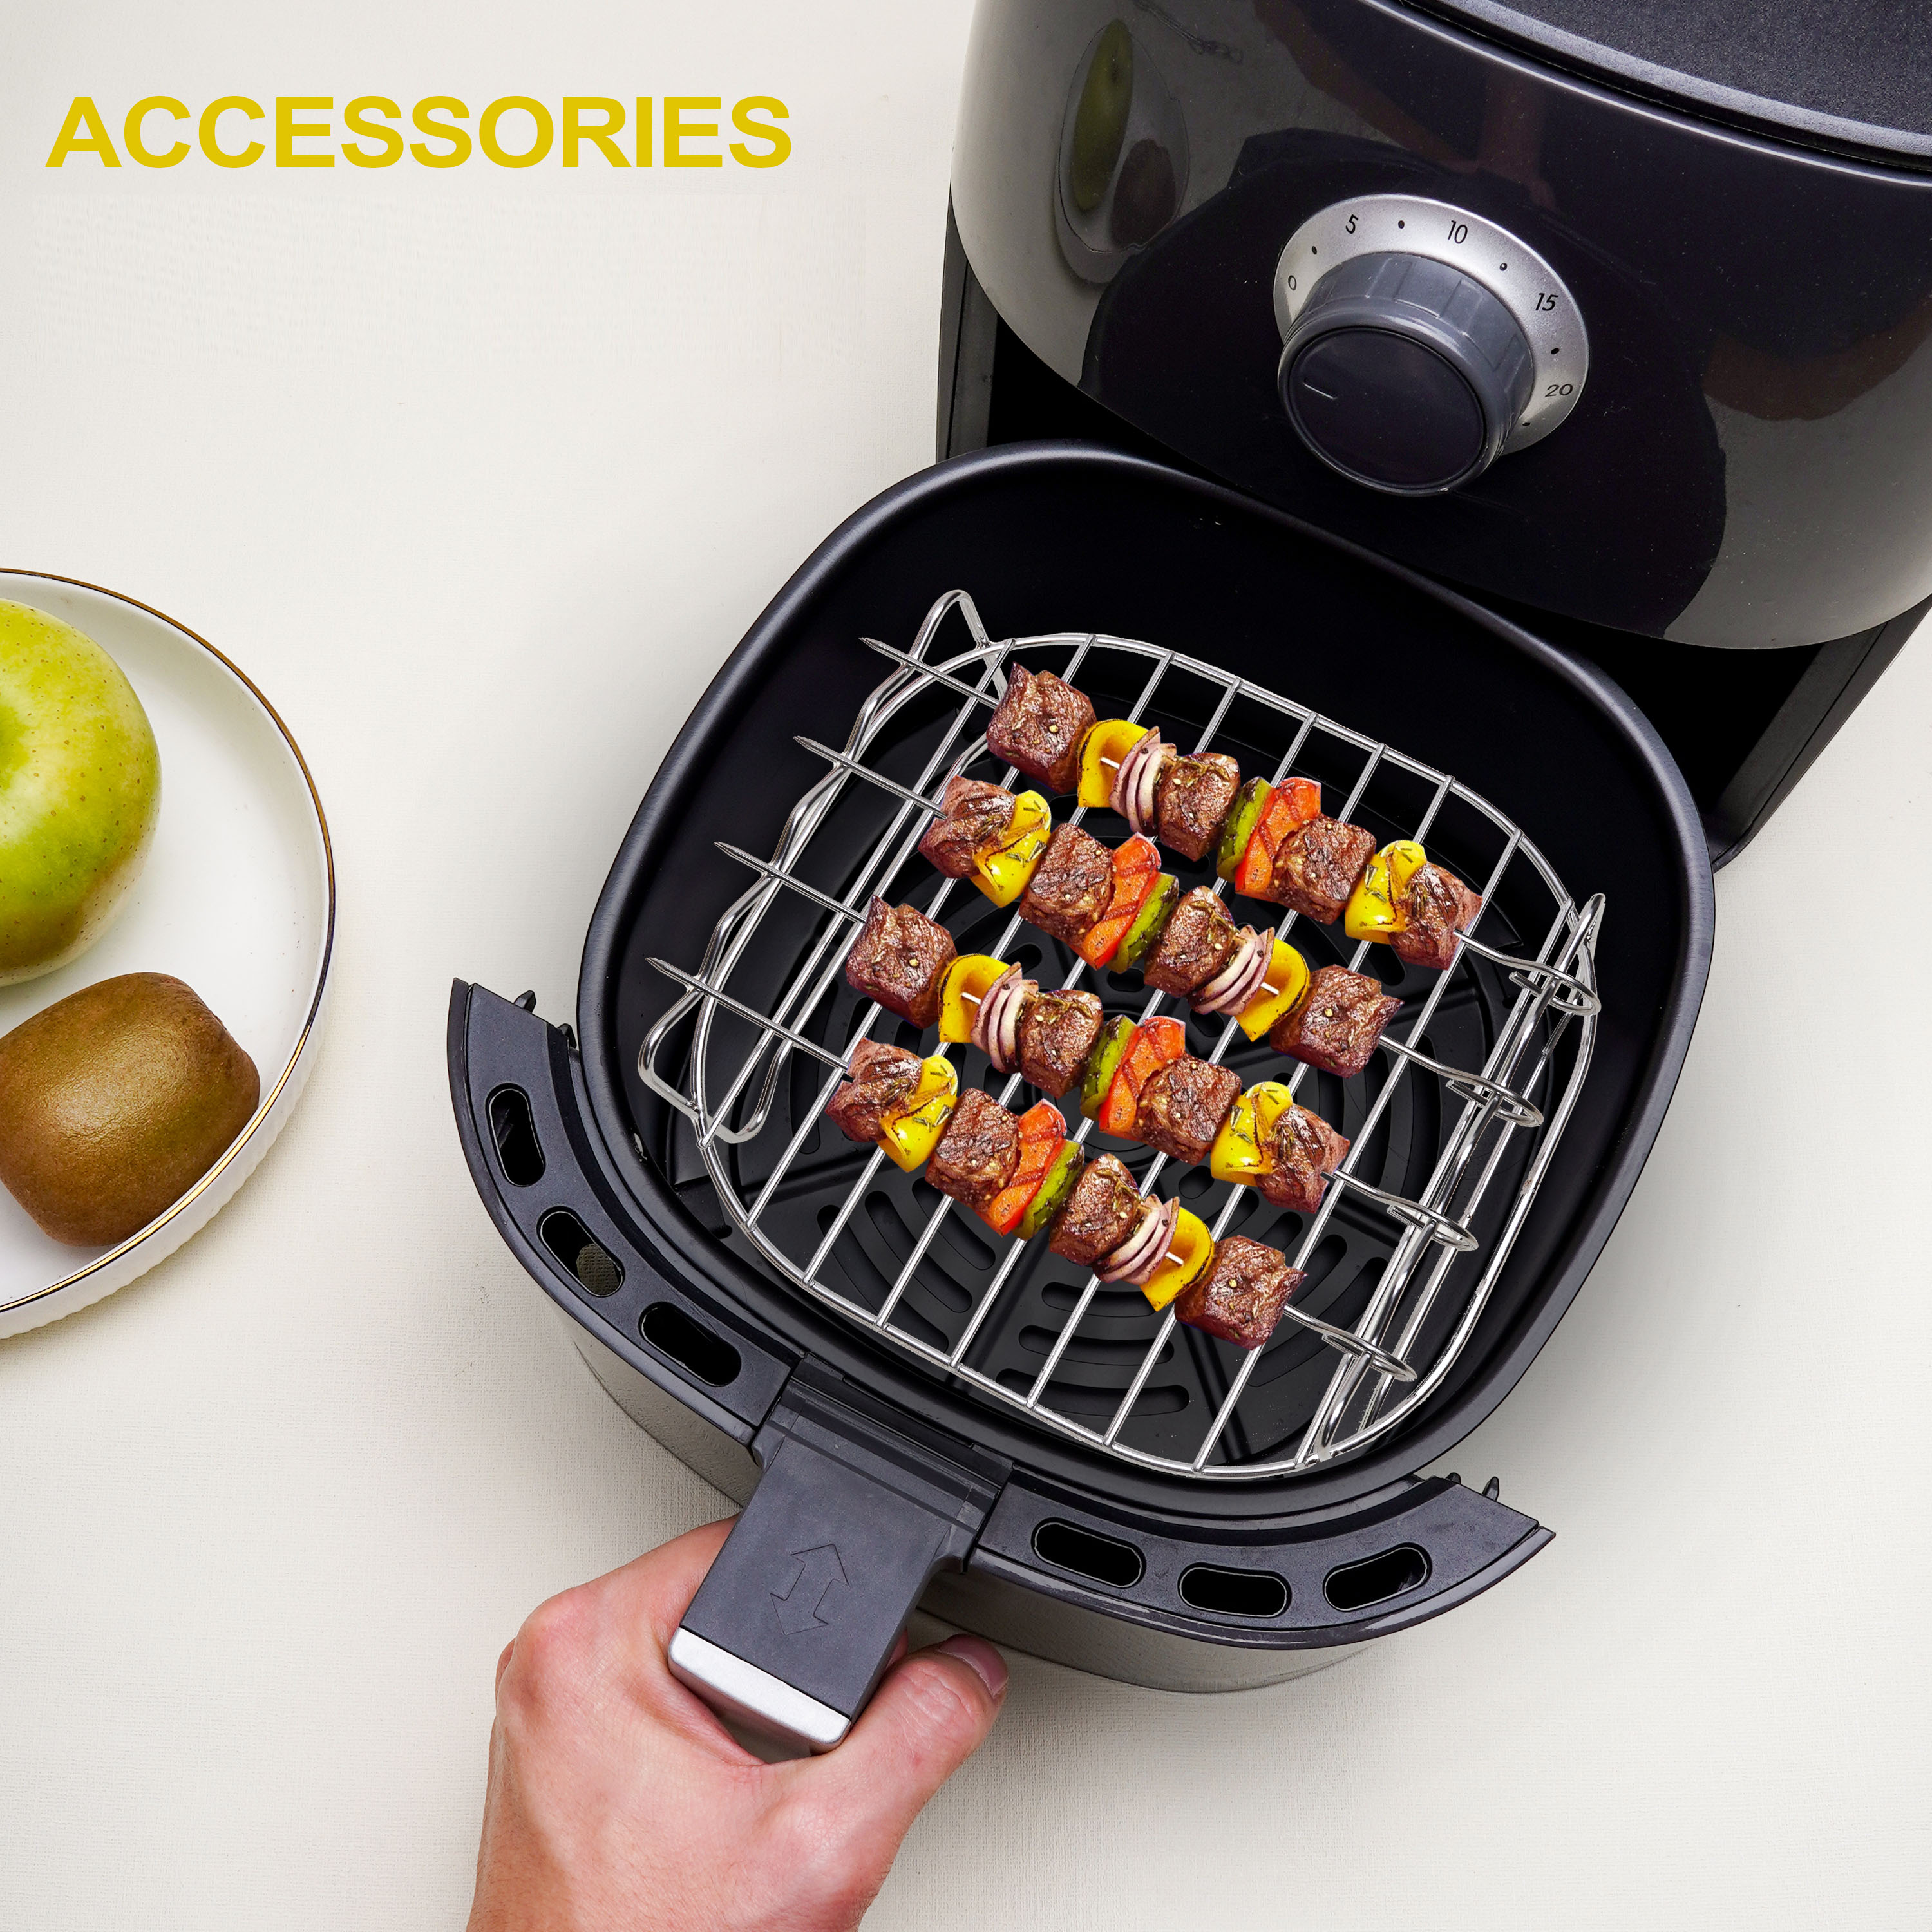  Air Fryer Accessories-Air Fryer Rack Set of 2, Multi-purpose  Layer Rack with 4 Barbecue Sticks, for Double Basket Grilling Rack Air Fryer  Accessories Cooking Rack for Oven Microwave Baking Roasting 